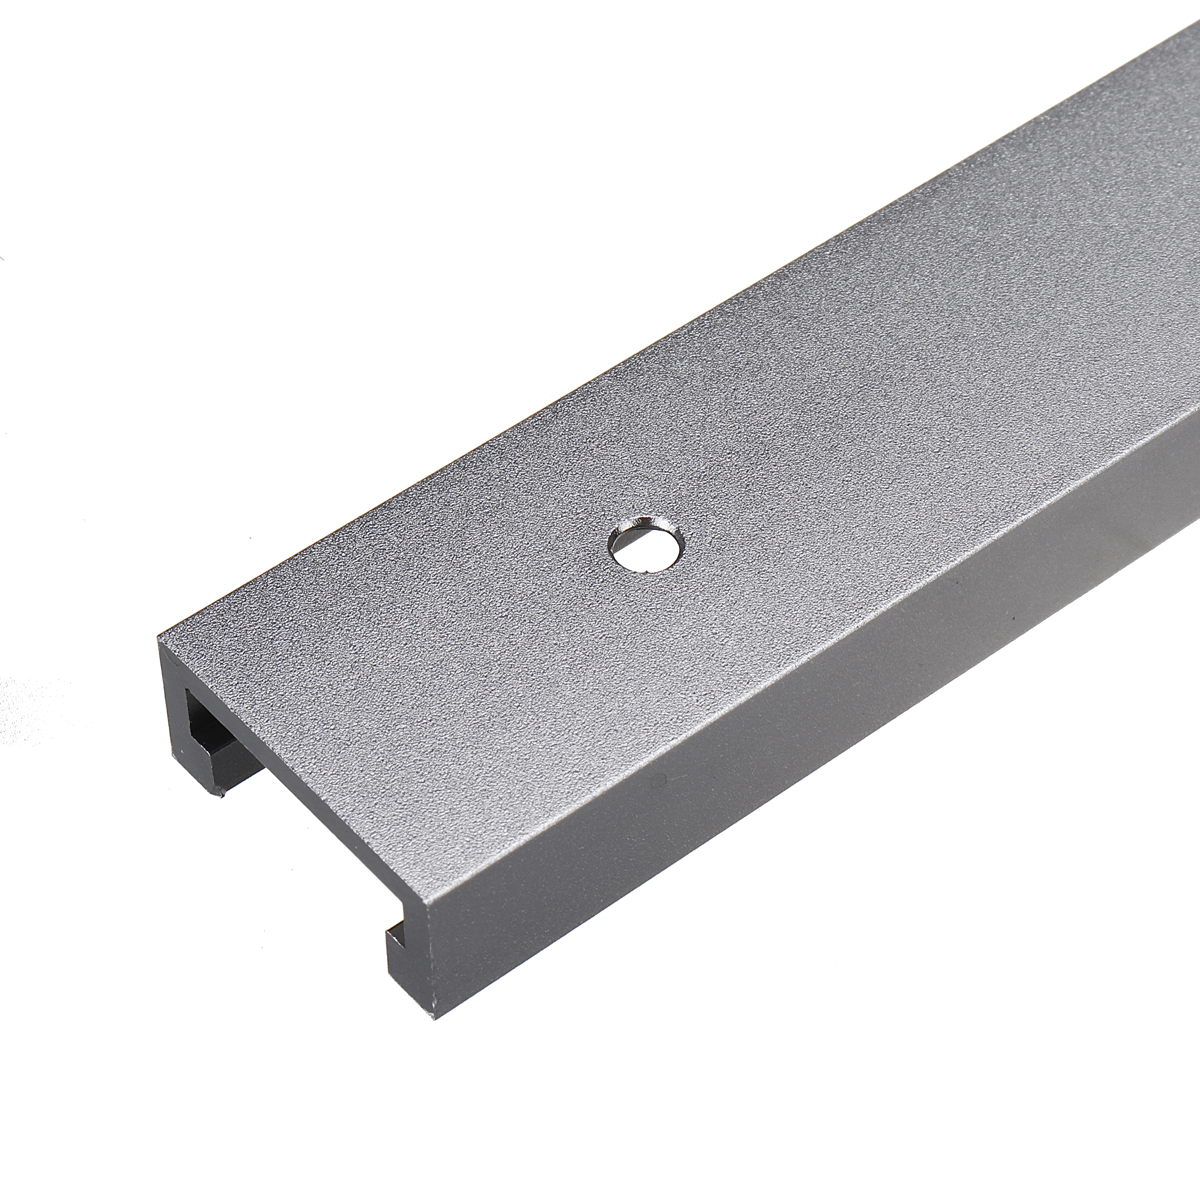 300mm-to-1220mm-Grey-T-Track-with-Predrilled-Mounting-Holes-30mm-x-128mm-Miter-Slot-for-Saw-Router-T-1810952-10